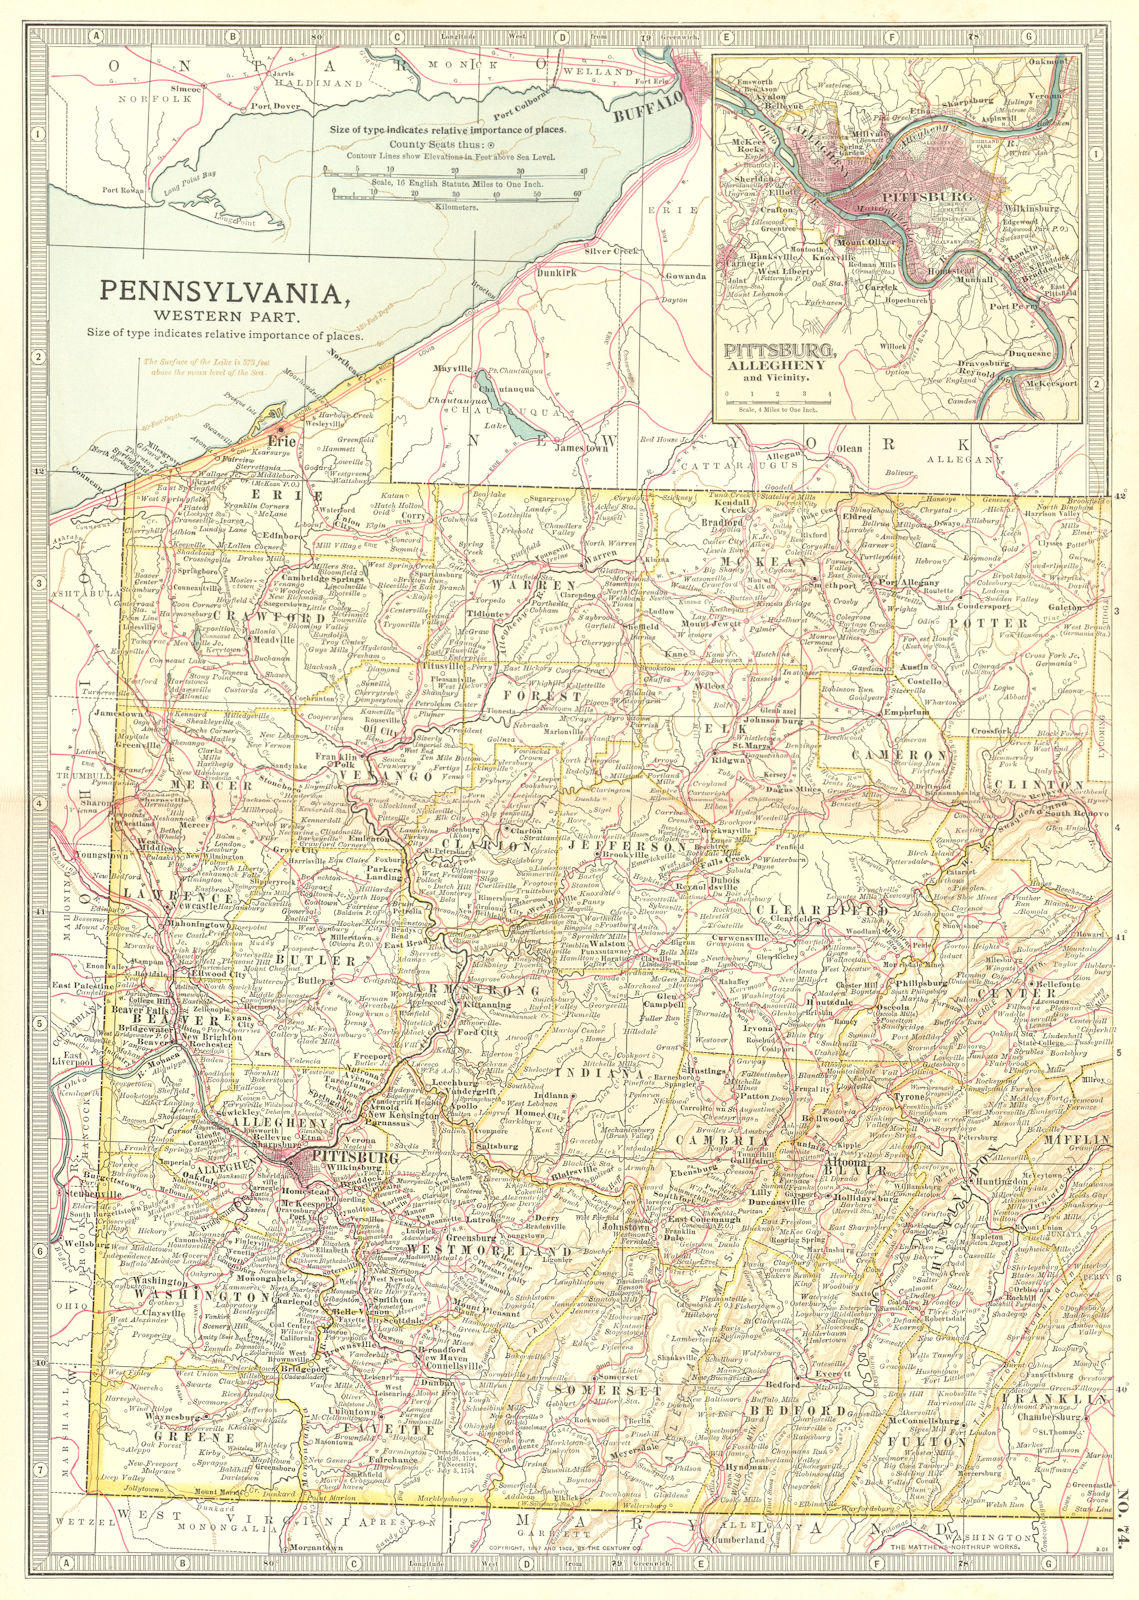 PENNSYLVANIA WEST PITTSBURG. 3 French & Indian War battles/dates 1754/5 1903 map